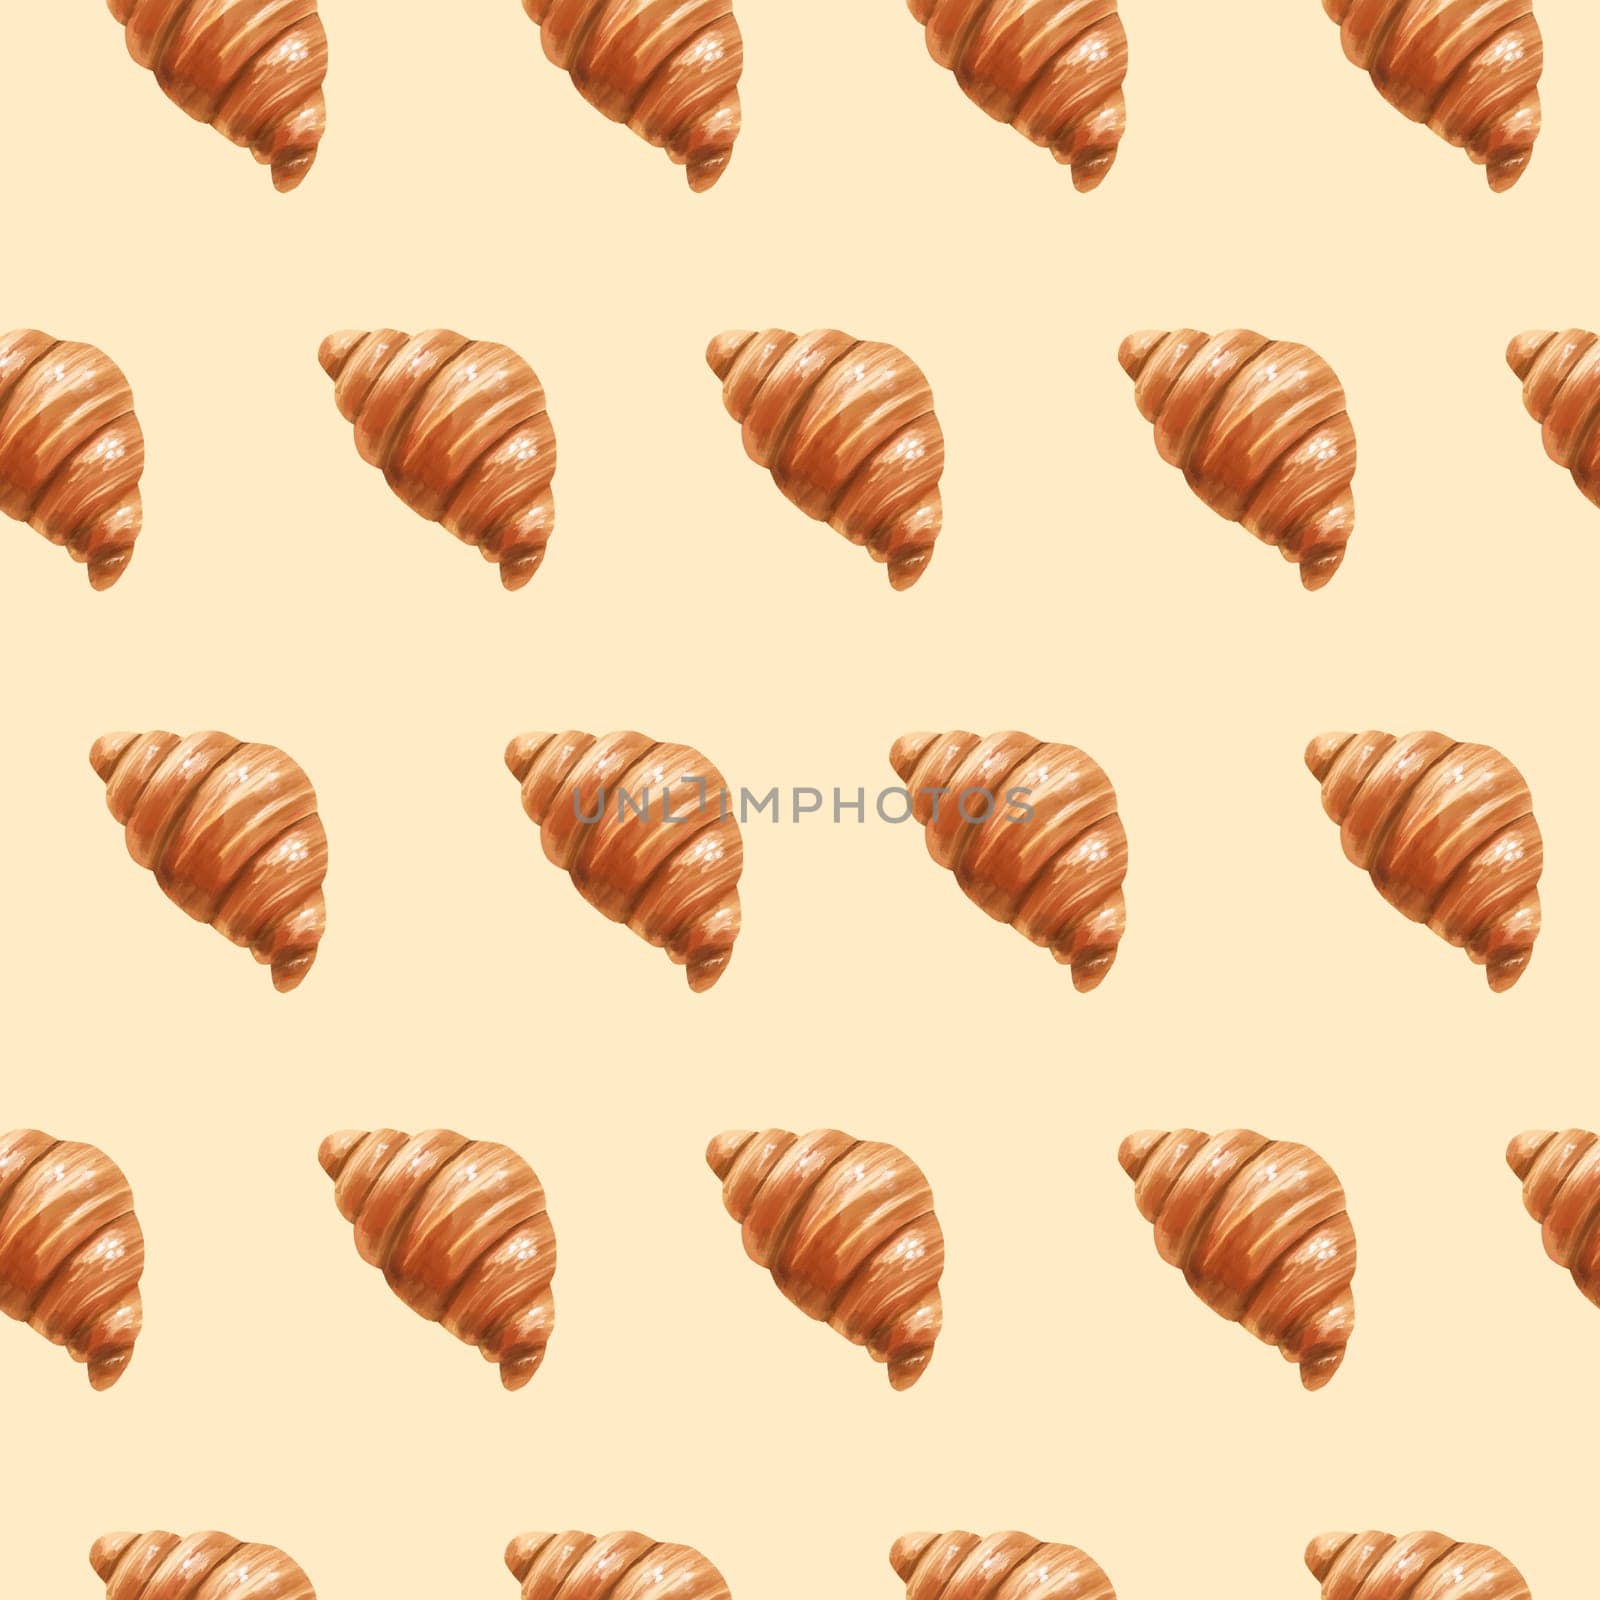 Seamless pattern with baking. Hand drawn illustrations of sweet pastries by ElenaPlatova